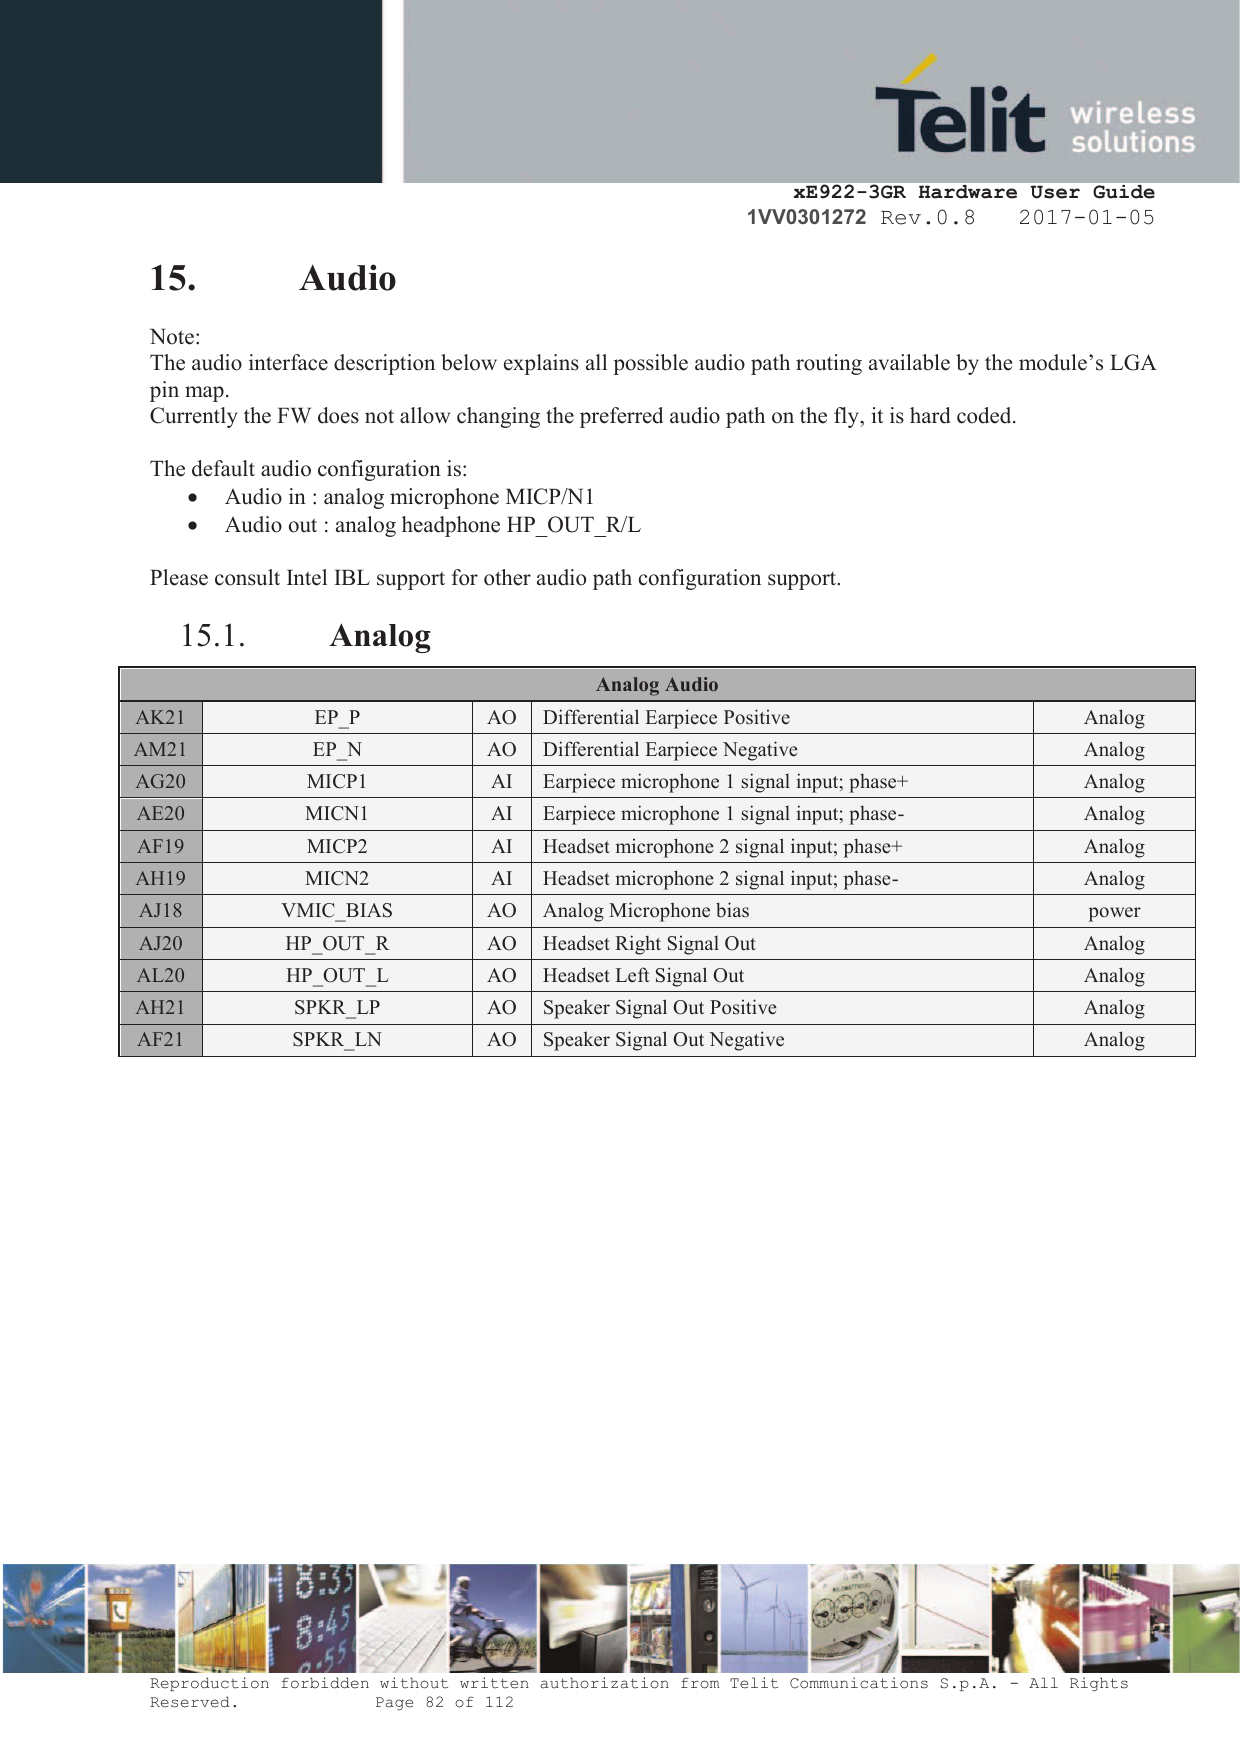     xE922-3GR Hardware User Guide 1VV0301272 Rev.0.8   2017-01-05 Reproduction forbidden without written authorization from Telit Communications S.p.A. - All Rights Reserved.    Page 82 of 112  15. Audio Note:  The audio interface description below explains all possible audio path routing available by the module’s LGA pin map. Currently the FW does not allow changing the preferred audio path on the fly, it is hard coded.  The default audio configuration is: · Audio in : analog microphone MICP/N1 · Audio out : analog headphone HP_OUT_R/L  Please consult Intel IBL support for other audio path configuration support. 15.1. Analog Analog Audio AK21 EP_P AO Differential Earpiece Positive Analog AM21 EP_N AO Differential Earpiece Negative Analog AG20 MICP1 AI Earpiece microphone 1 signal input; phase+  Analog AE20 MICN1 AI Earpiece microphone 1 signal input; phase- Analog AF19 MICP2 AI Headset microphone 2 signal input; phase+  Analog AH19 MICN2 AI Headset microphone 2 signal input; phase- Analog AJ18 VMIC_BIAS AO Analog Microphone bias power AJ20 HP_OUT_R AO Headset Right Signal Out Analog AL20 HP_OUT_L AO Headset Left Signal Out Analog AH21 SPKR_LP AO Speaker Signal Out Positive Analog AF21 SPKR_LN AO Speaker Signal Out Negative Analog             